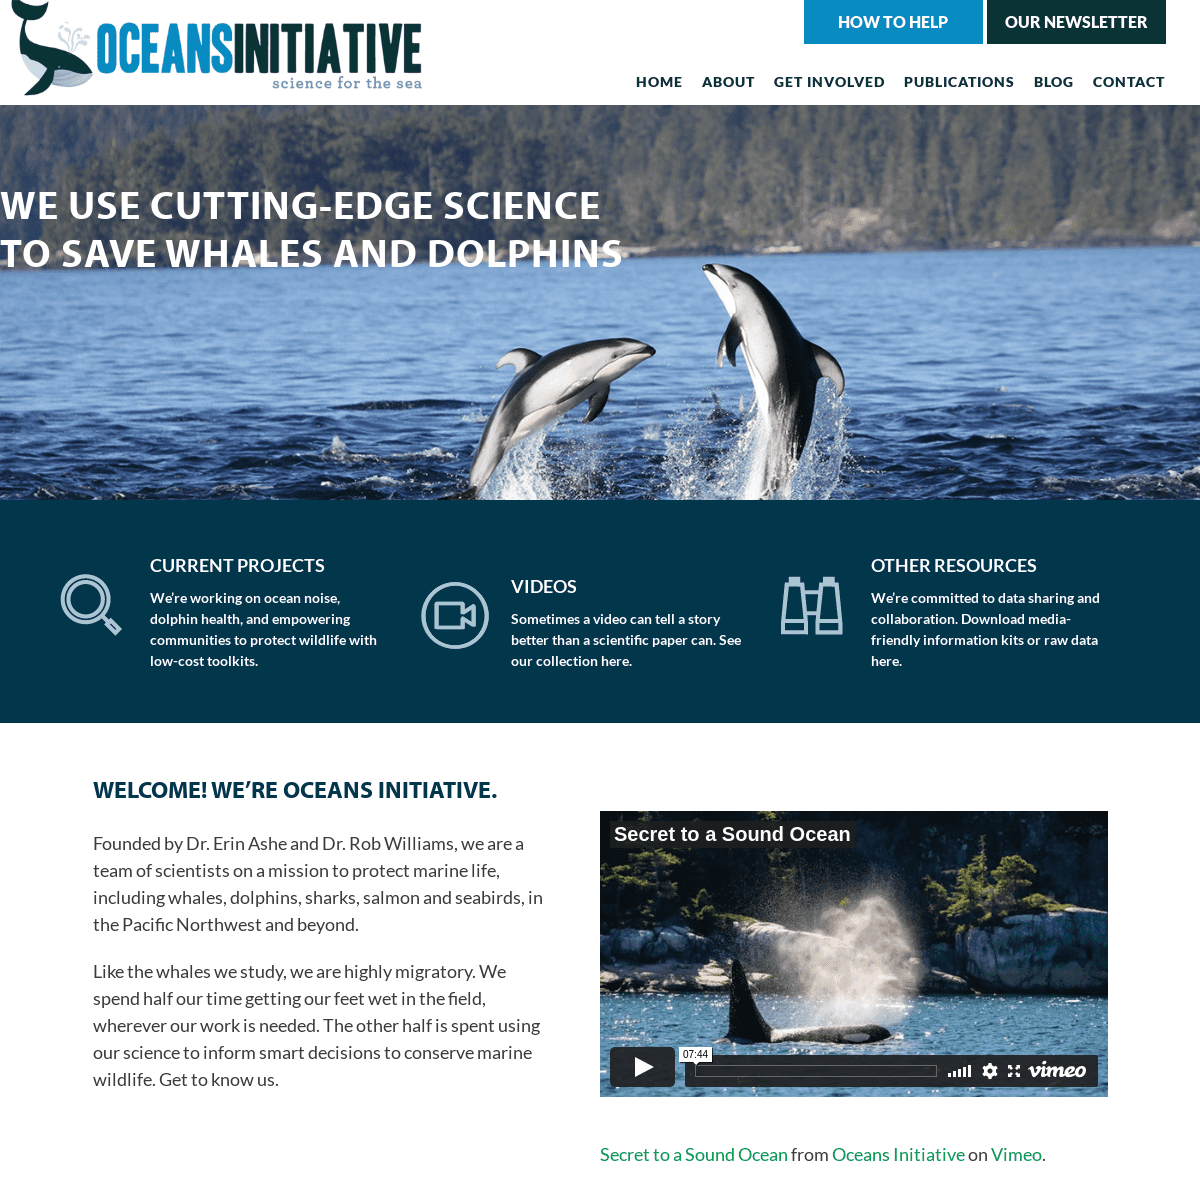 A complete backup of https://oceansinitiative.org